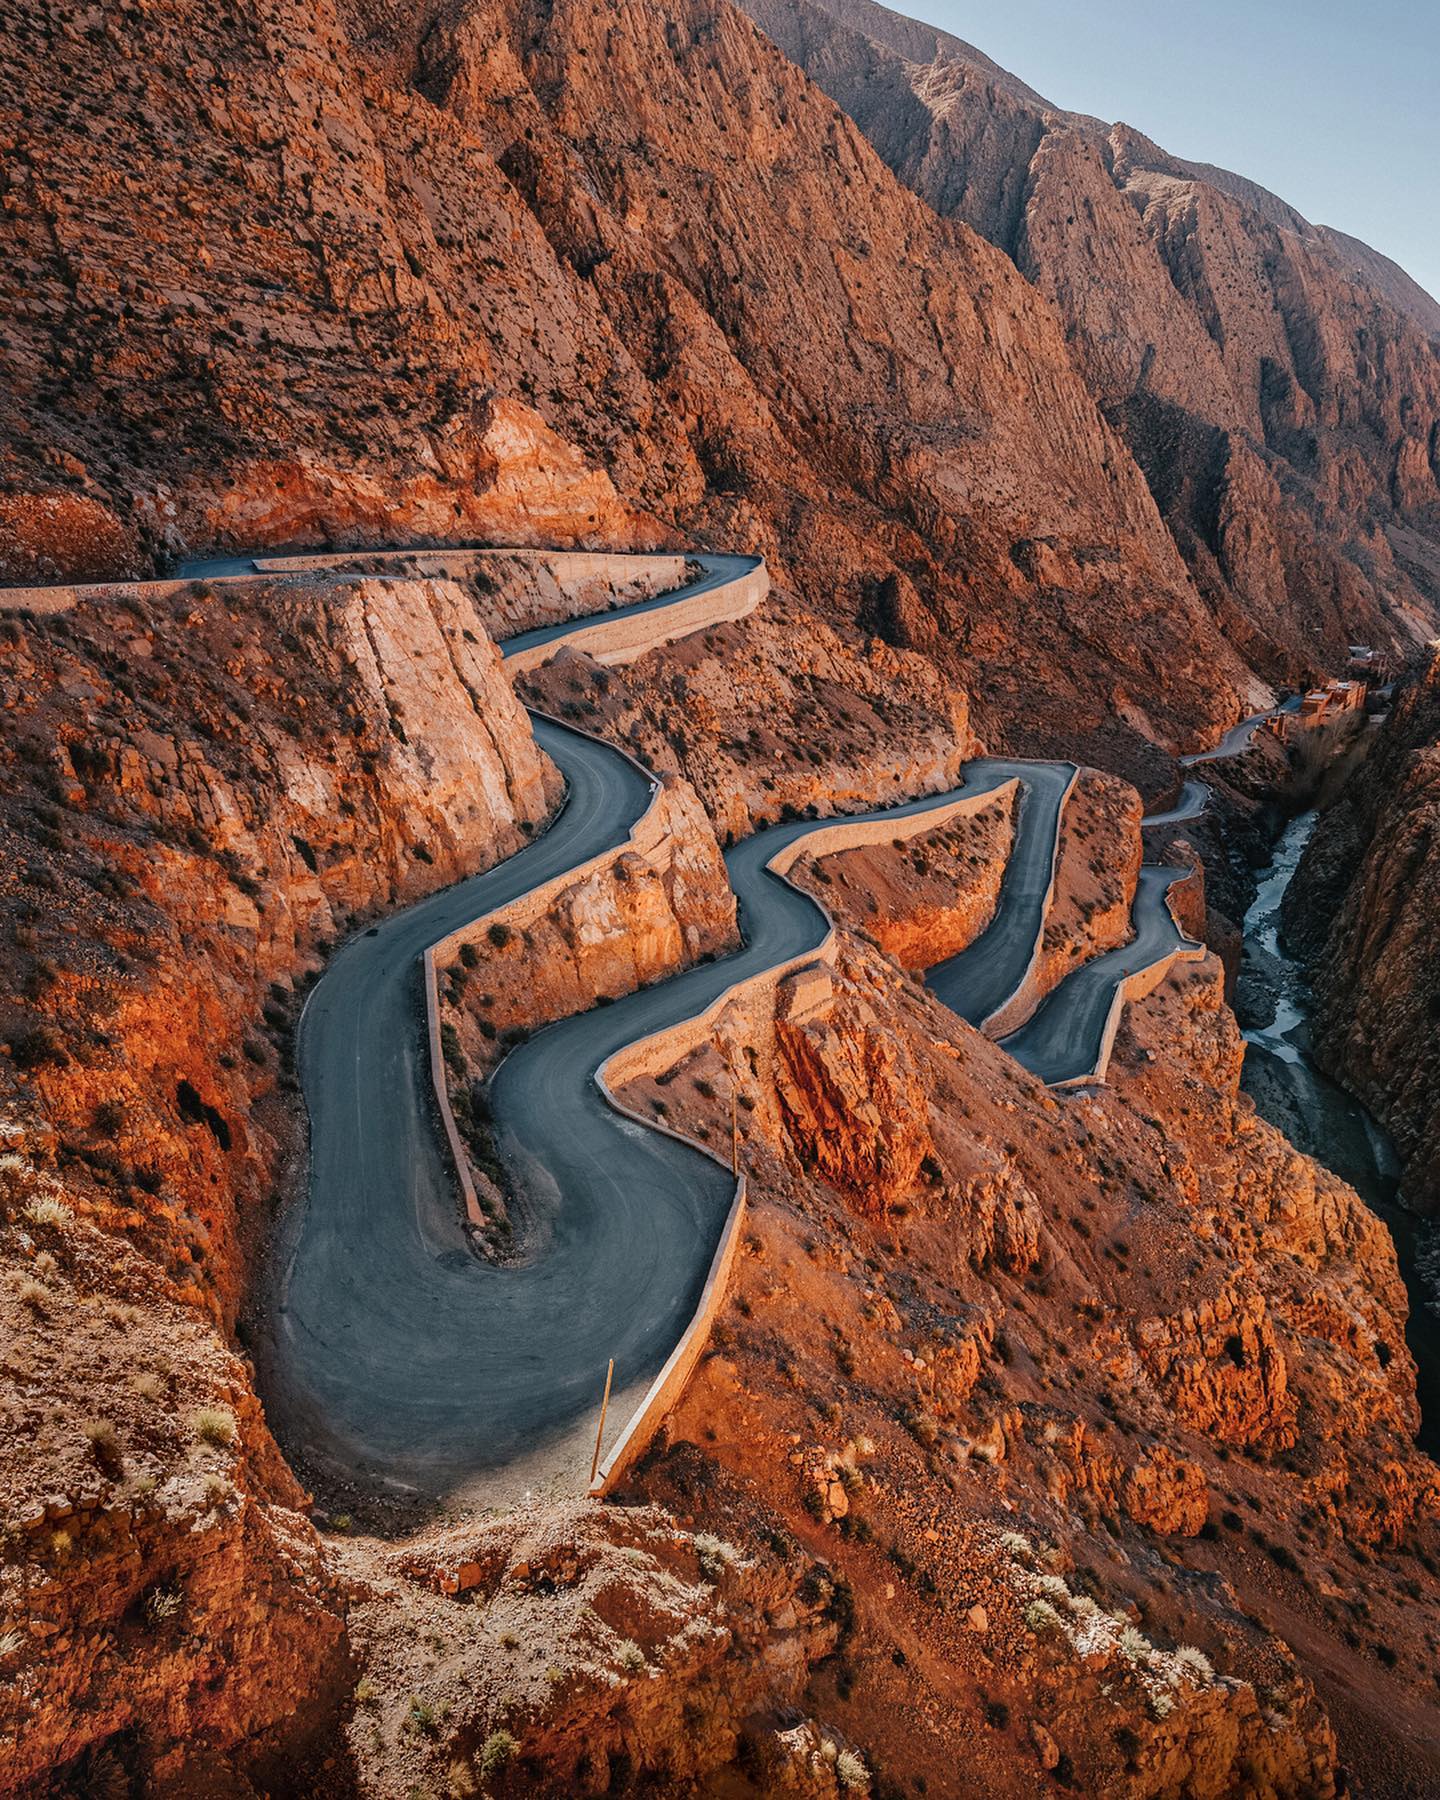 One of the most scenic drives in the world: The Dadès Gorge, located in the heart of the High Atlas Mountains of Morocco. It is carved out by the Dadès River. The area is known for stunning rock formations and kasbahs along the gorge 🏞
.
.
.
#artofvisuals
#discoverearth
#earthfocus
#stayandwander
#earthpix
#ourplanetdaily
#beautifuldestinations
#bestvacations
#theoutbound
#discoverglobe
#awesome_earthpix
#exploremore
#wildernessculture
#welivetoexplore
#eclectic_shotz
#allaboutadventures
#canon_photos
#nakedplanet
#roamtheplanet
#tentree
#wonderful_places
#theglobewanderer
#travelstoke
#awesomeearth
#hellofrom
#mountainstones
#wiesnernews 
#vzcomood
#wanderlust
#liveforthestory
.
@inmorocco
@simplymorocco
@moroccobyyou 
@instgram_mor 
@passionpassport
@earth_deluxe 
@wonderful_places 
@visit_morocco 
@morocco.vacations 
@topmorocco.photo 
@inmarrakech 
@travelling_morocco 
@welovebuzz
@welovebuzzar 
@moroccoplaces 
@colorfulmorocco 
@moroccoholiday_ 
@_morocco_photos